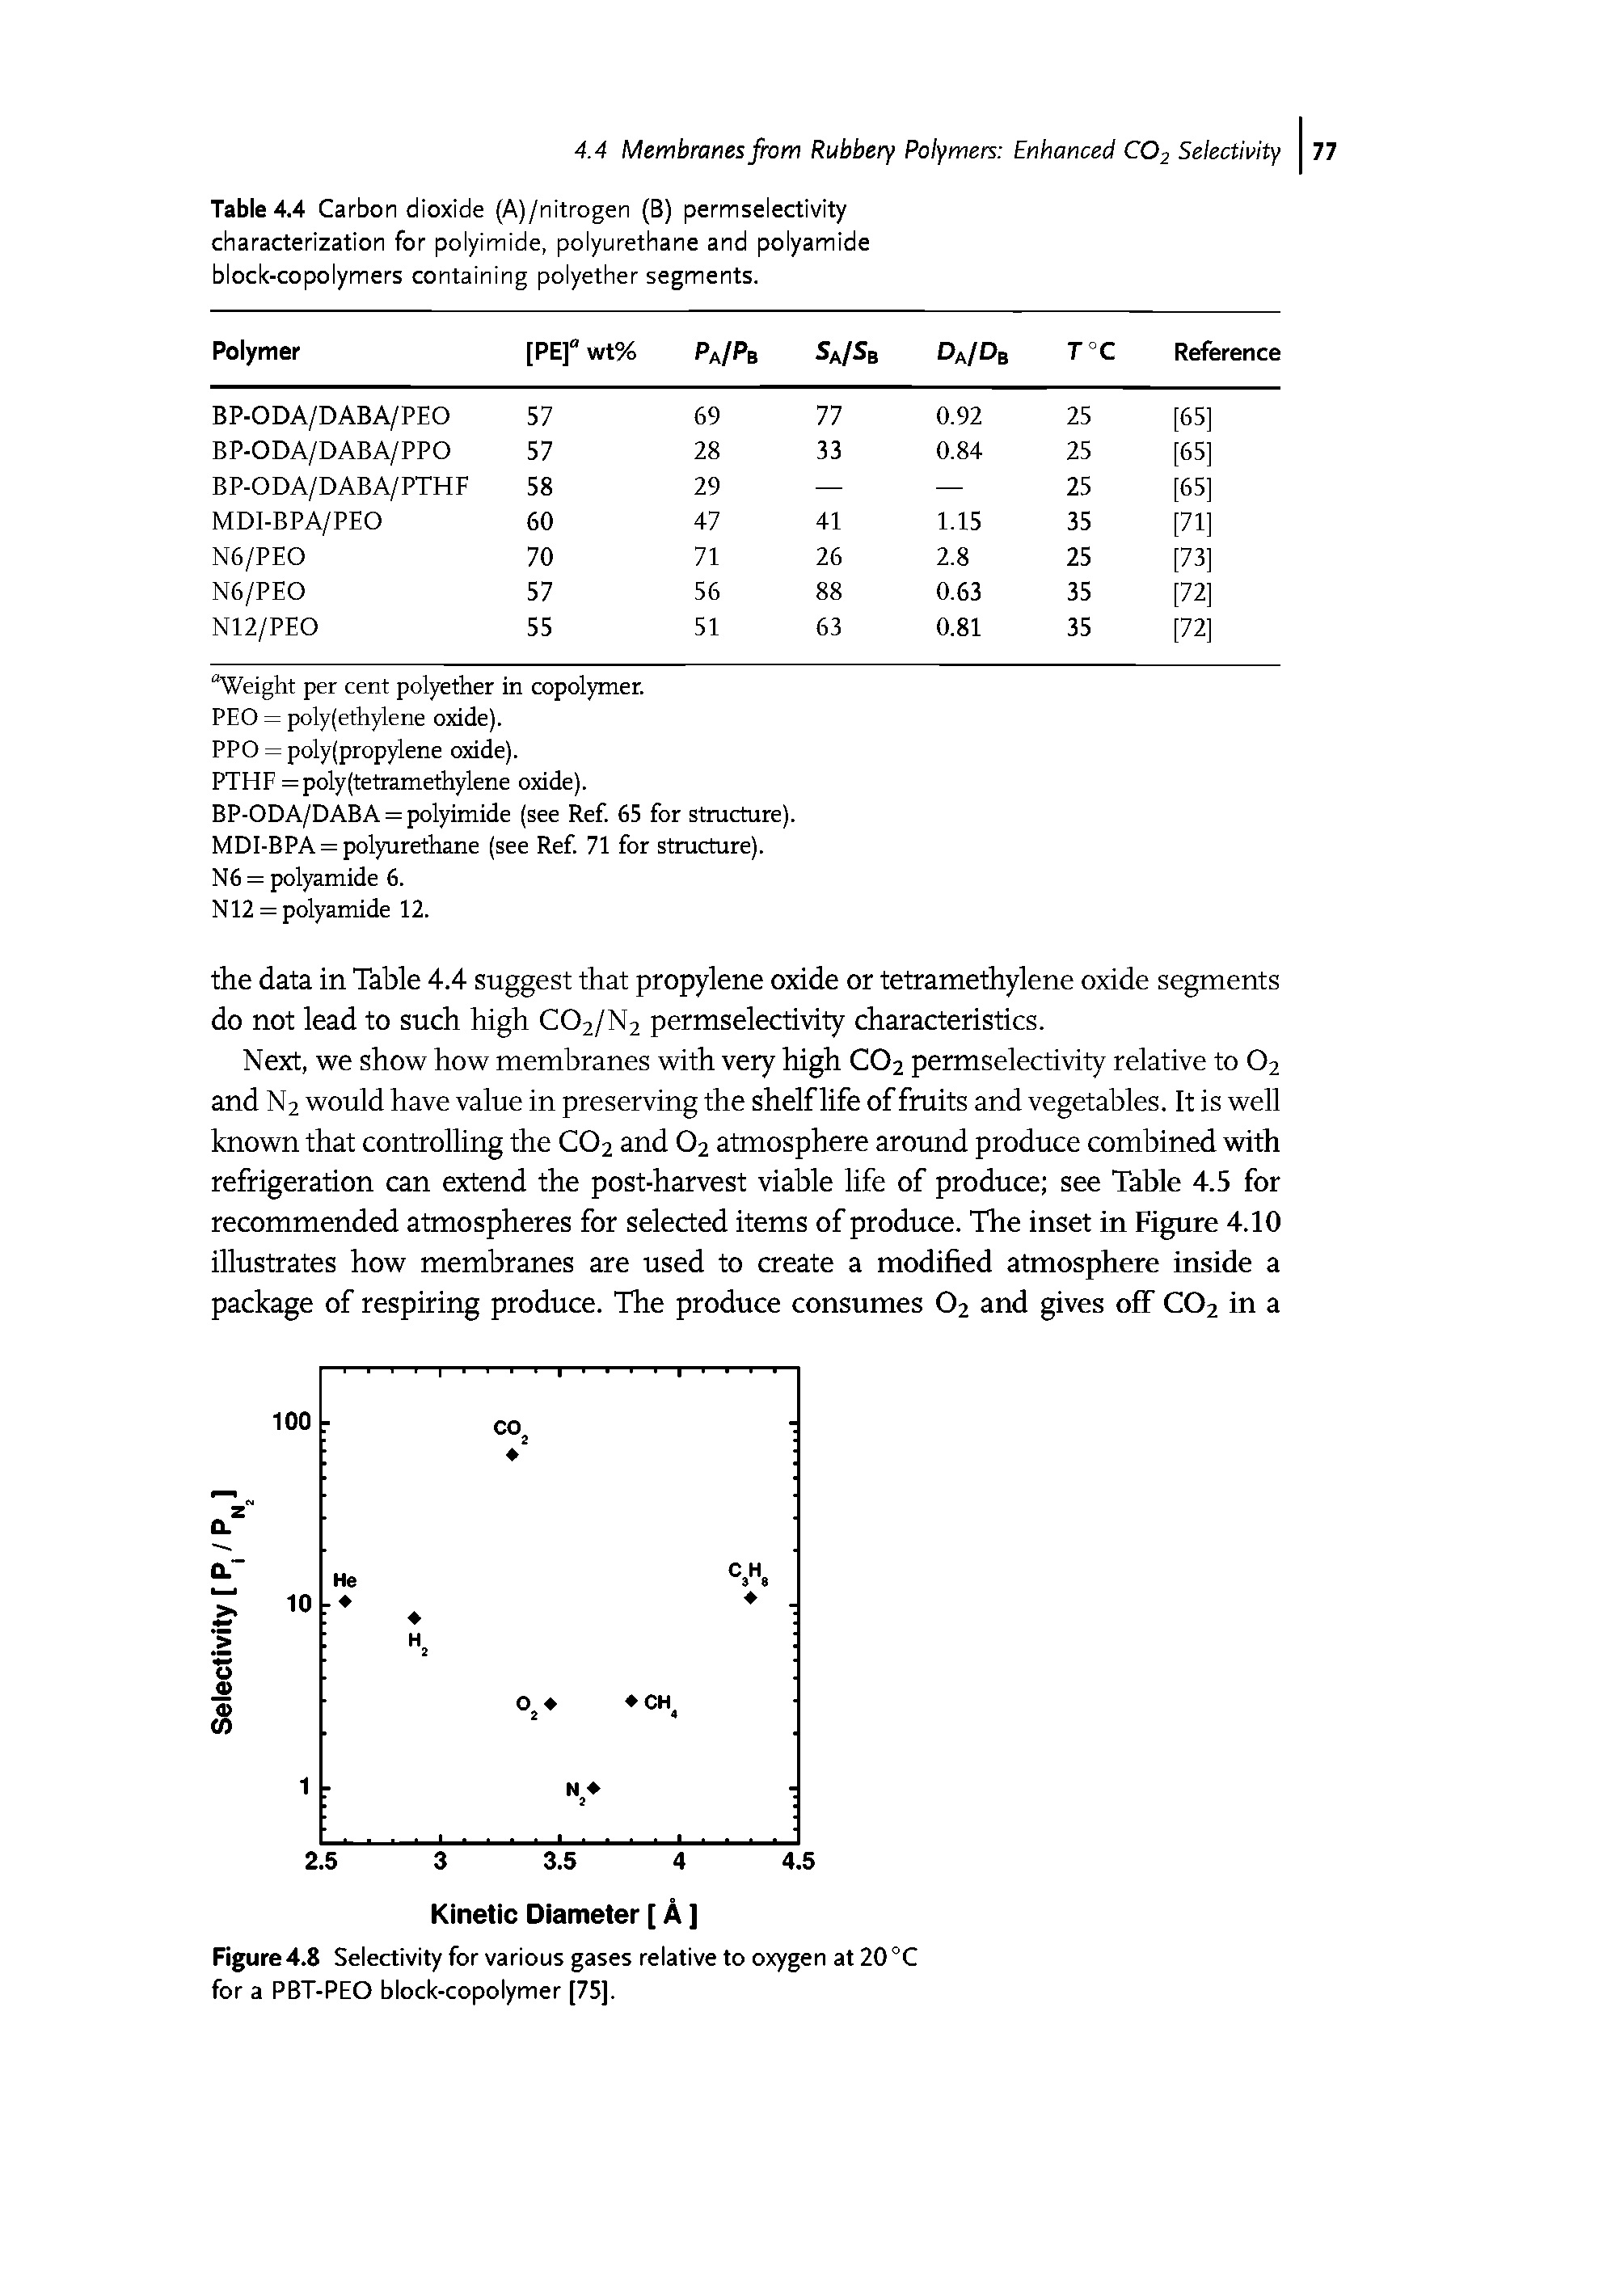 Table 4.4 Carbon dioxide (A)/nitrogen (B) permselectivity characterization for polyimide, polyurethane and polyamide block-copolymers containing polyether segments.